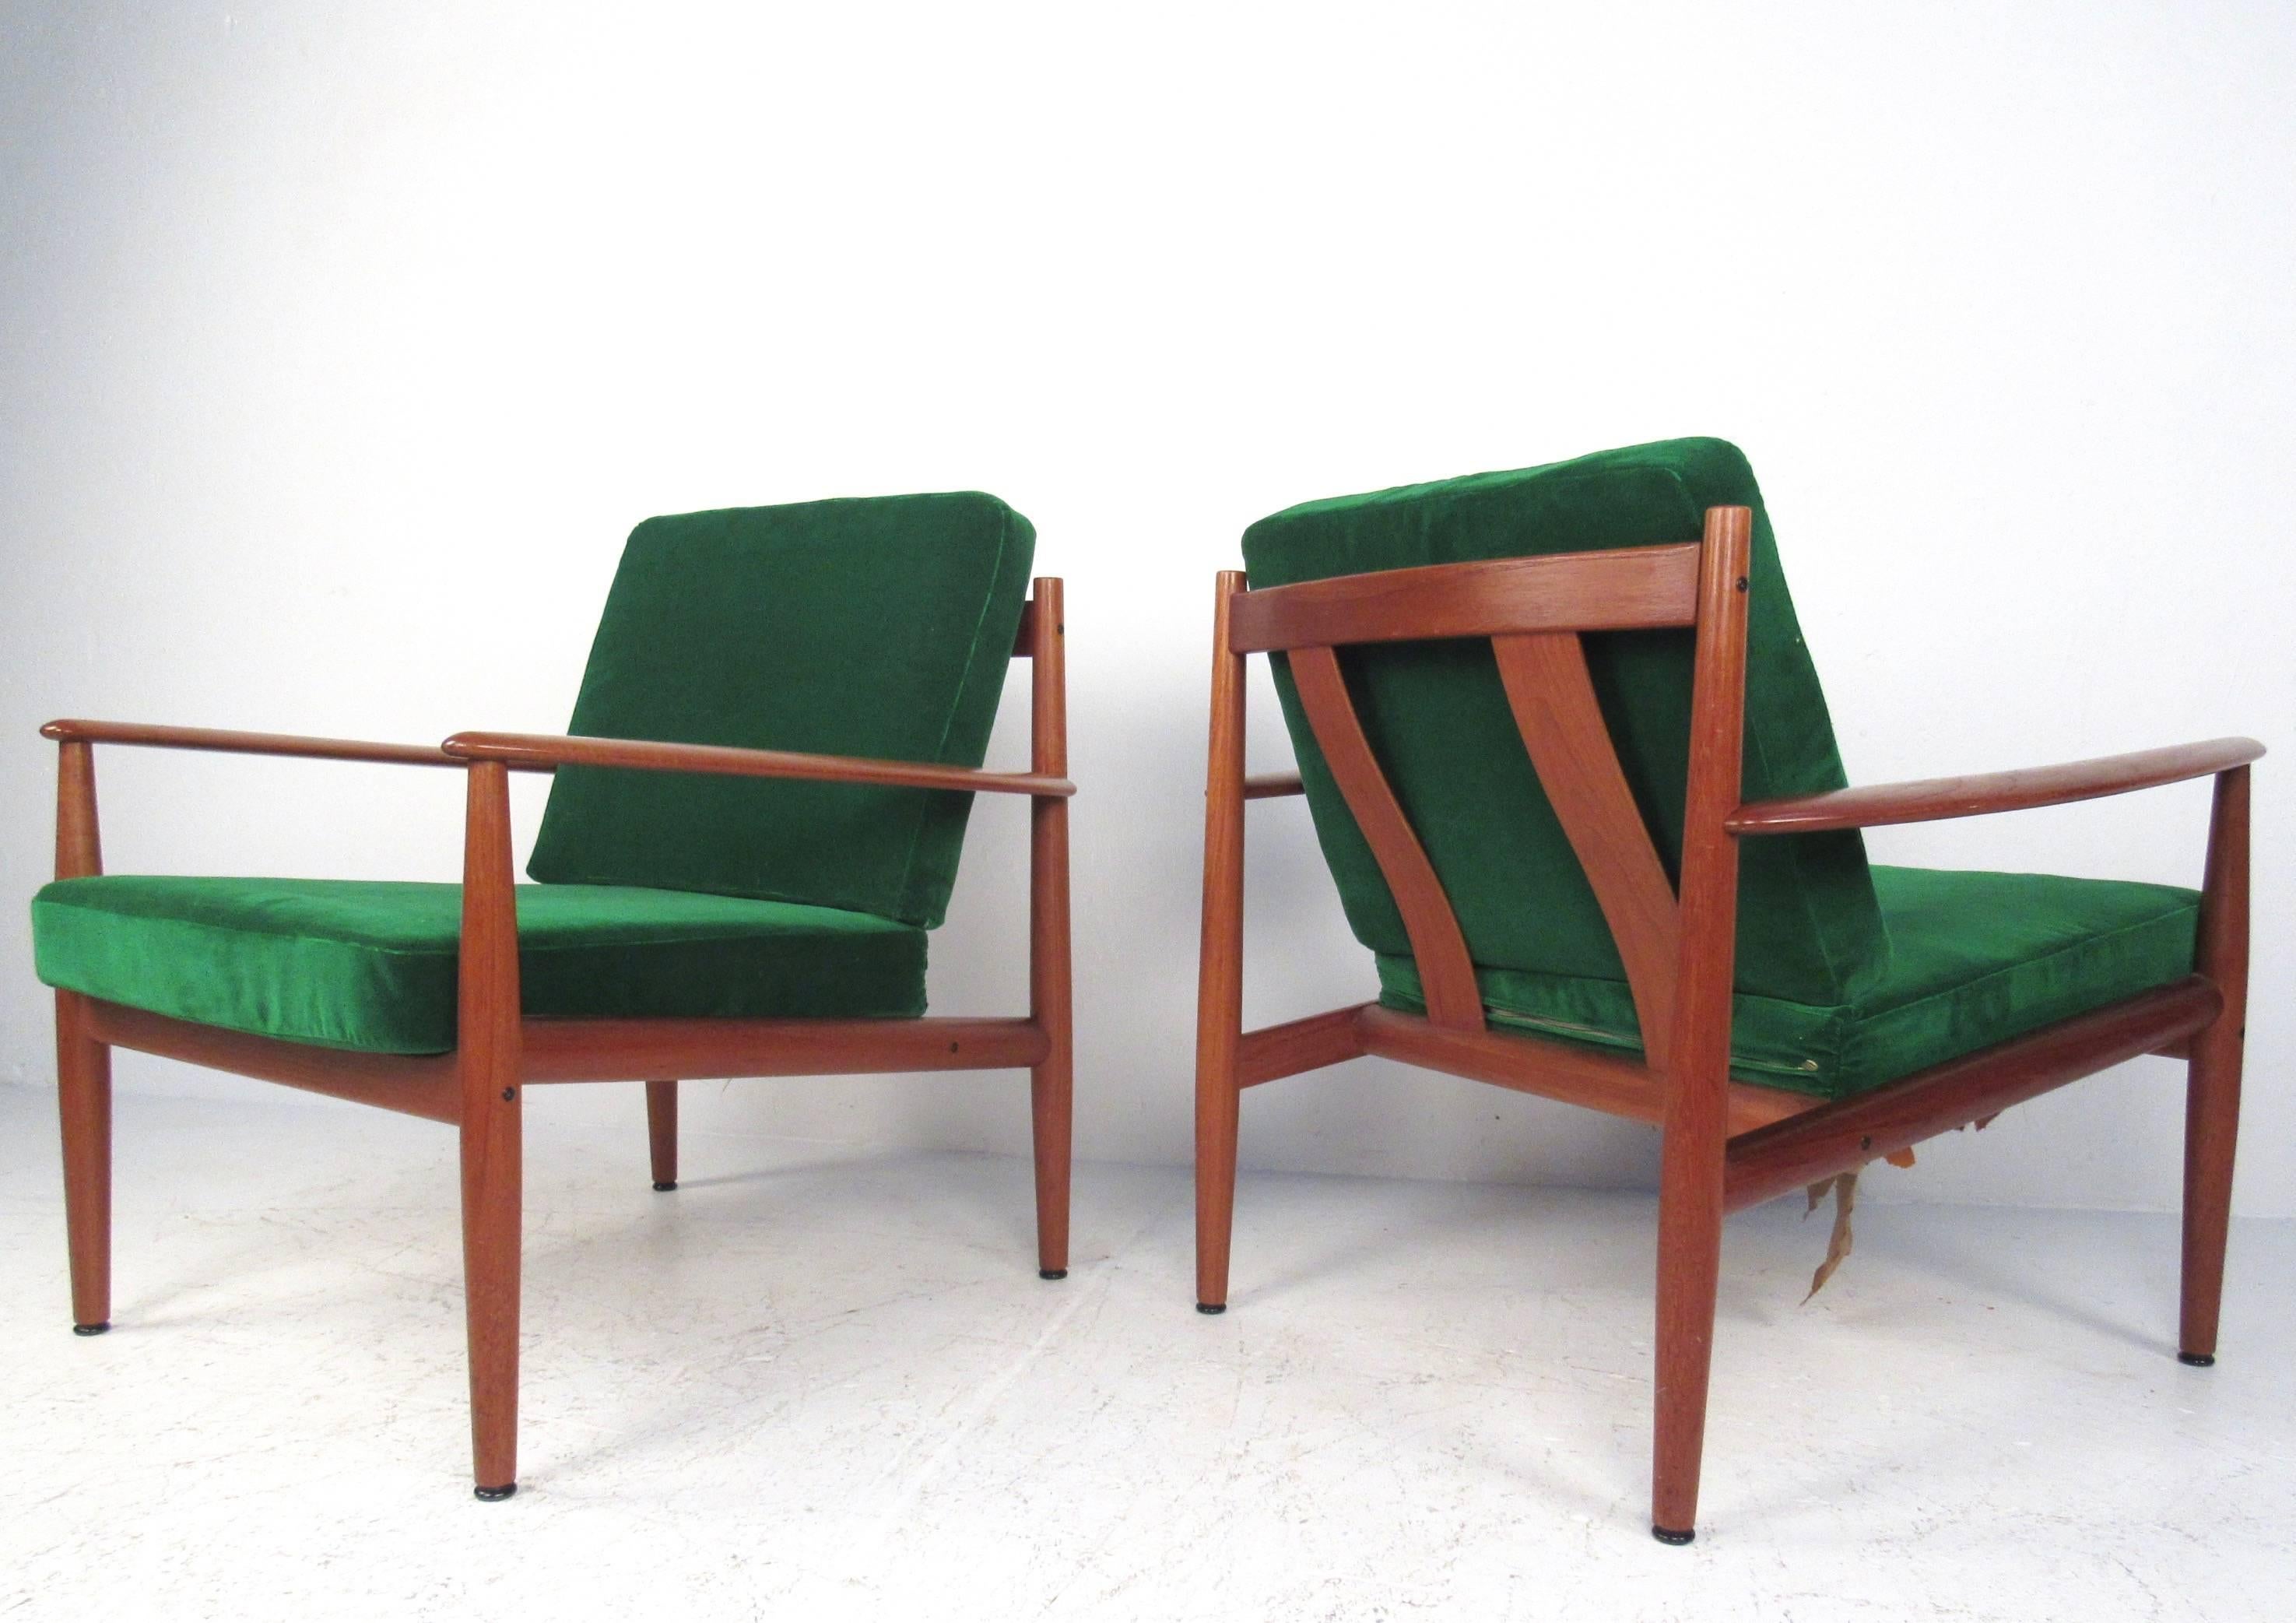 This vintage pair of teak armchairs features unique sculpted frames designed by Grete Jalk for France and Son. Plush green microsuede/velour-like upholstery over spring style seats make this pair of the perfect mix of comfort and style. Original